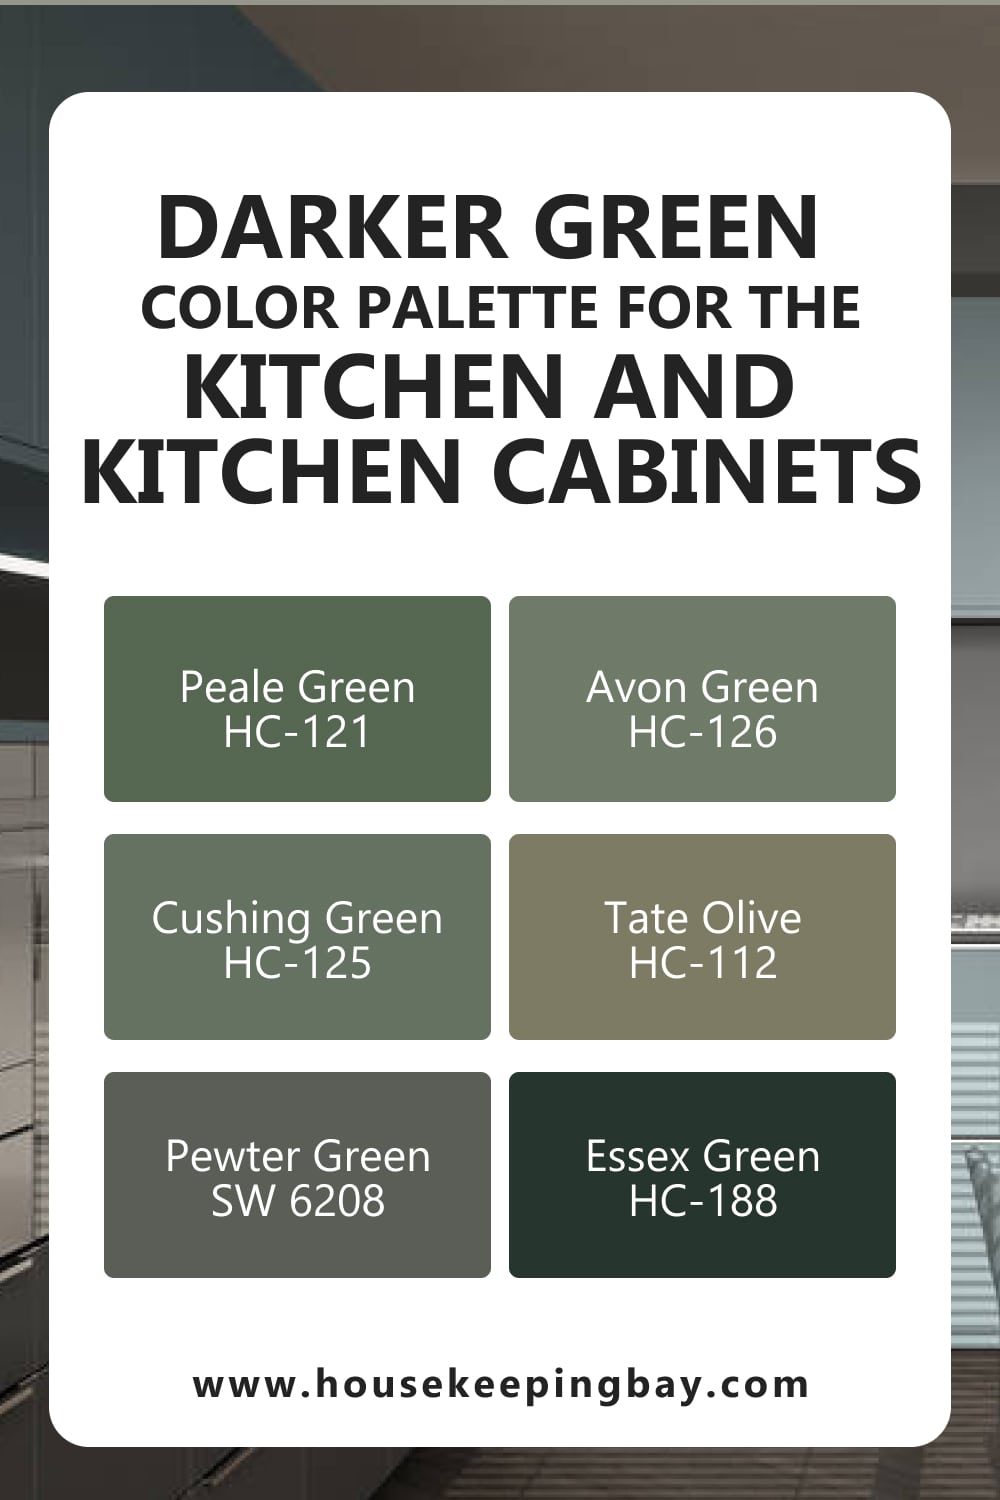 Darker Green Color Palette for the Kitchen and Kitchen Cabinets